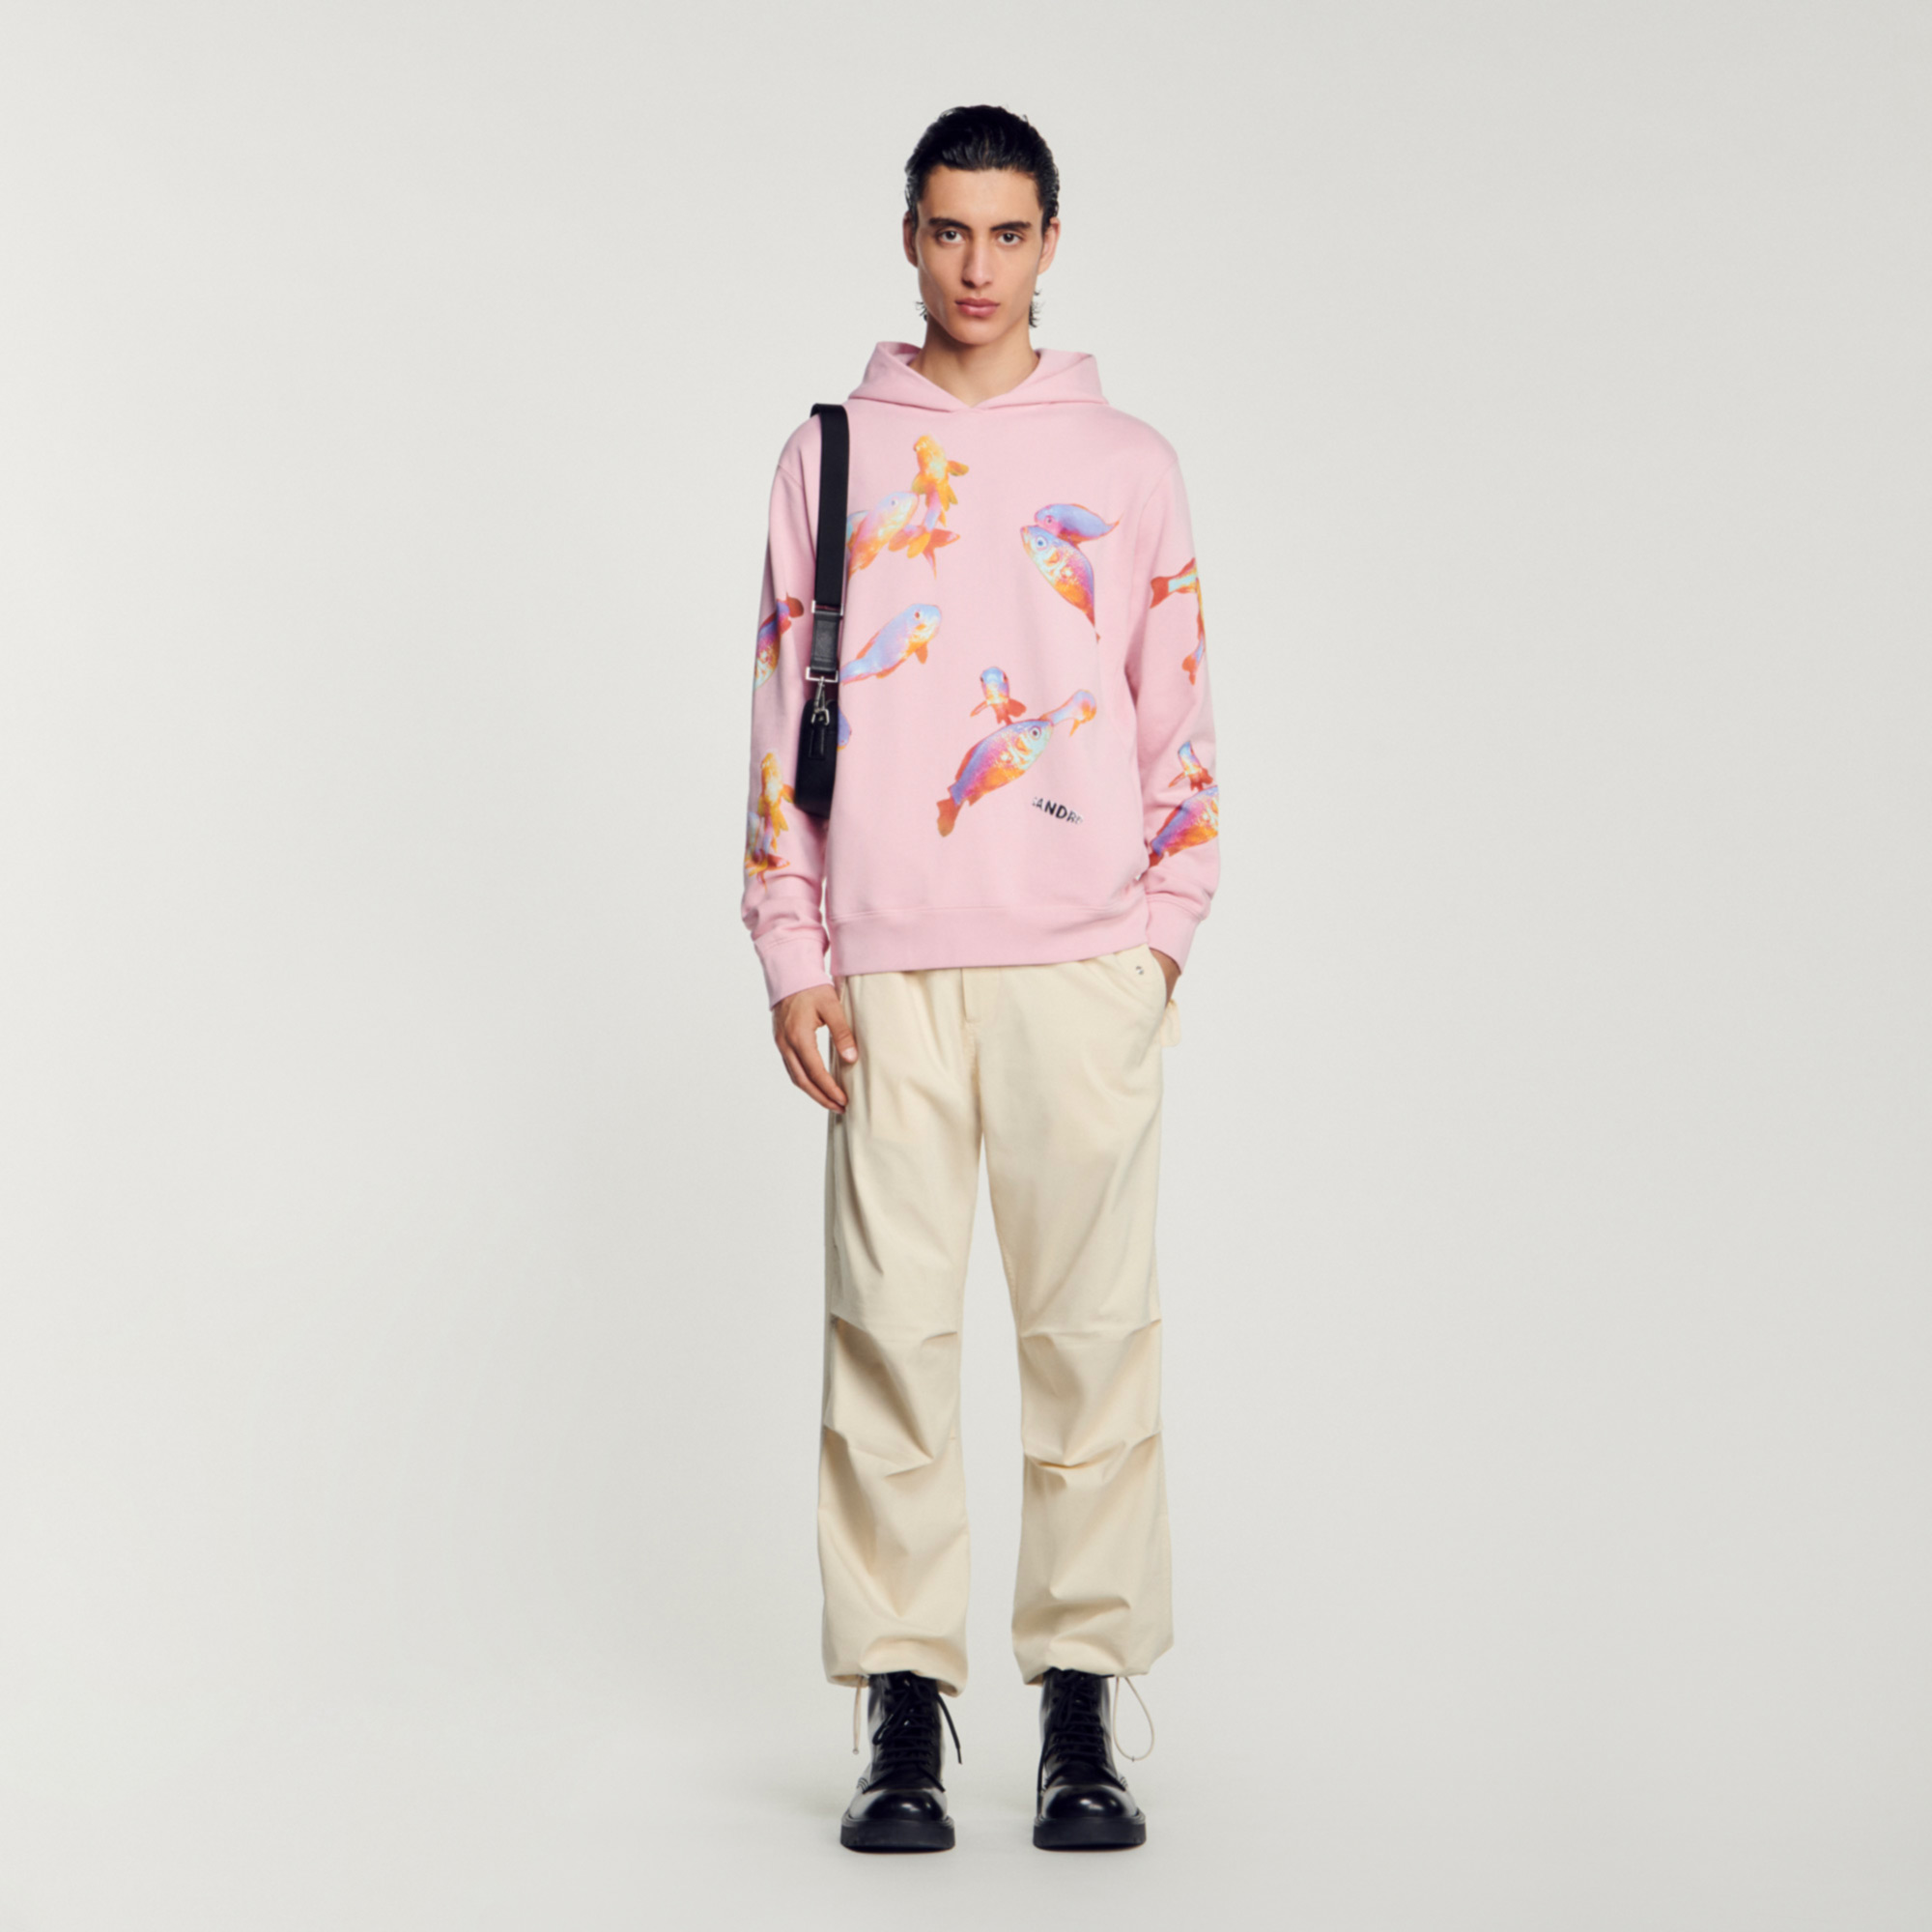 Sandro cotton Rib: Hooded, long-sleeve fleece sweatshirt, with two front pockets and embellished with a fish print